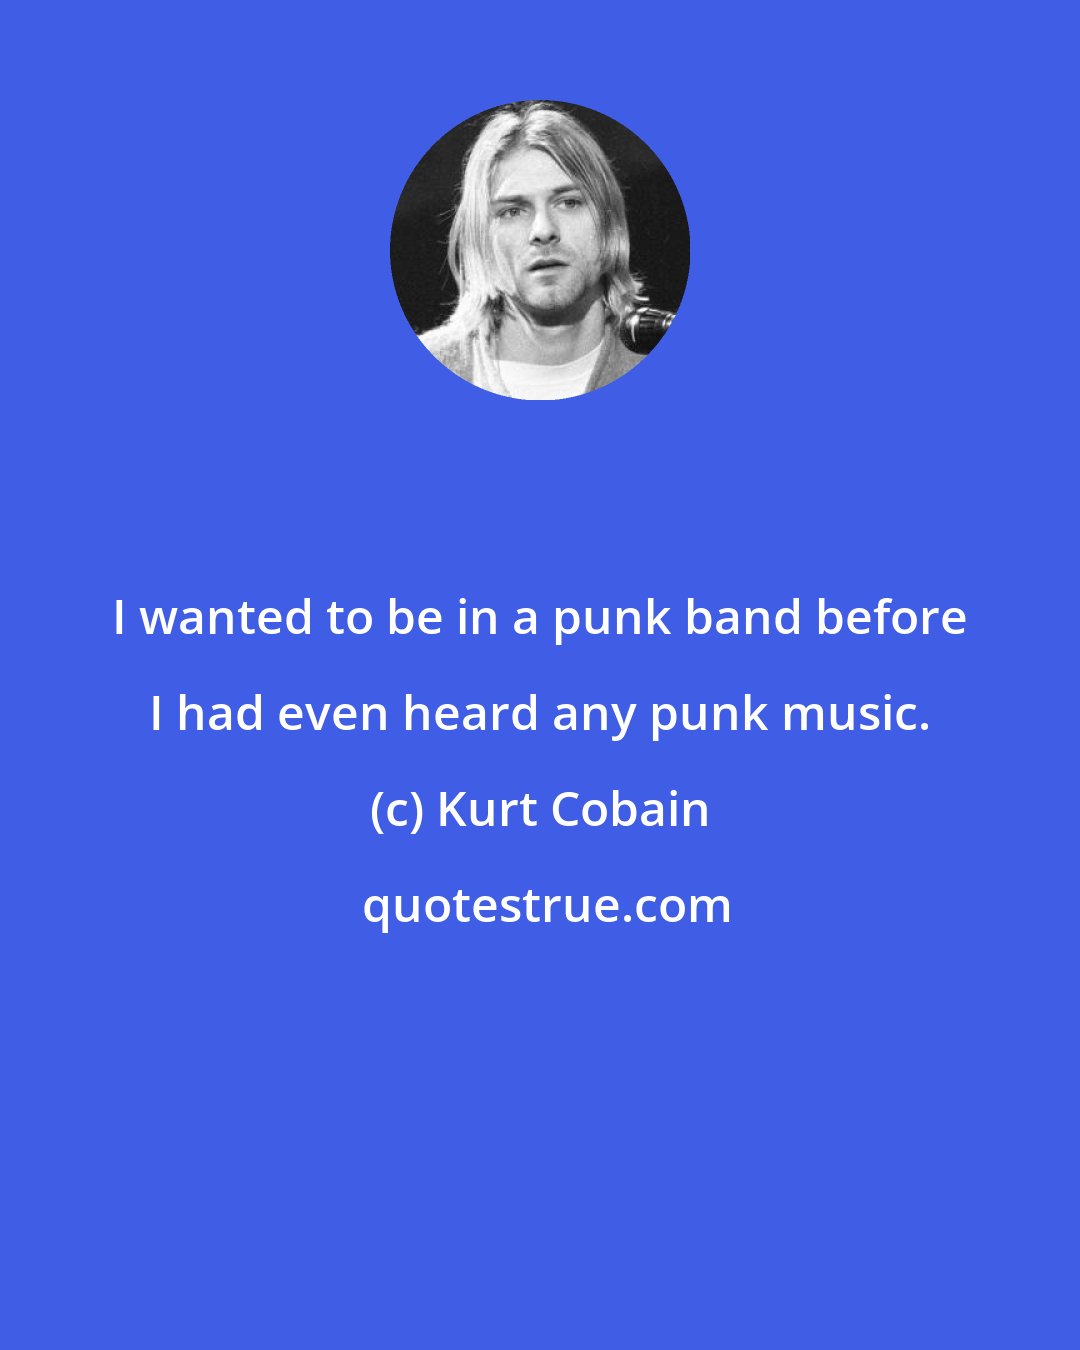 Kurt Cobain: I wanted to be in a punk band before I had even heard any punk music.